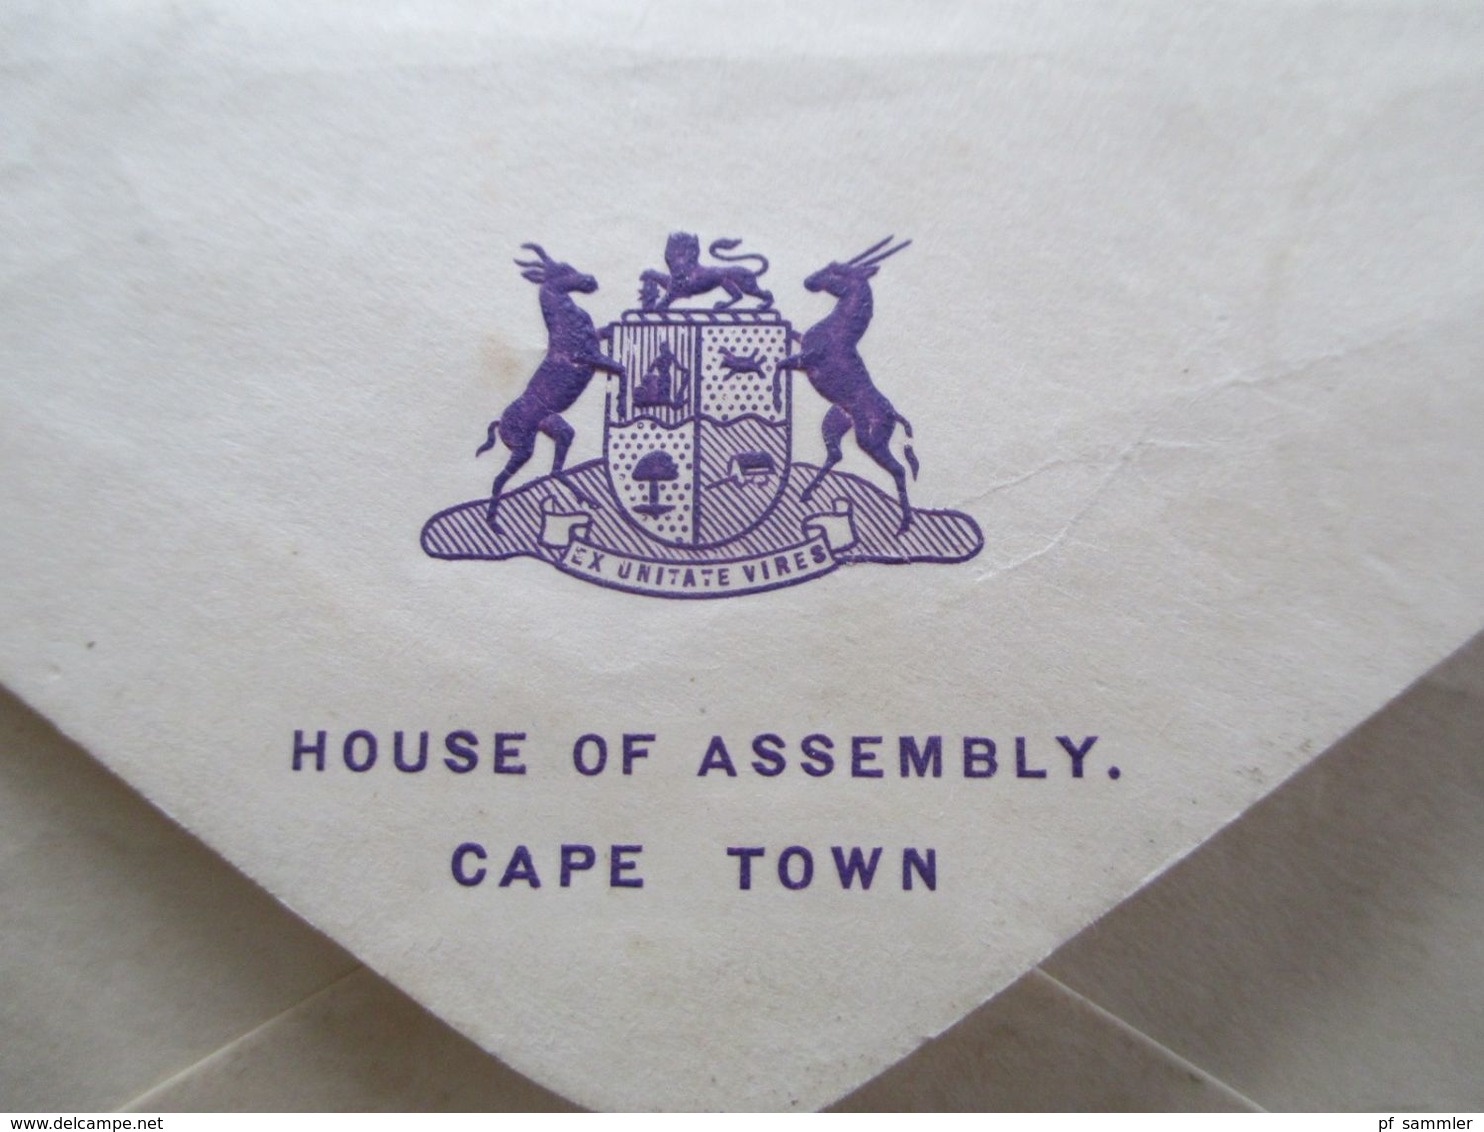 Südafrika 1947 Beleg Mit Wappen House Of Assembly Cape Town 3 Paare South Africa / Suid Africa Stempel Parliament - Briefe U. Dokumente